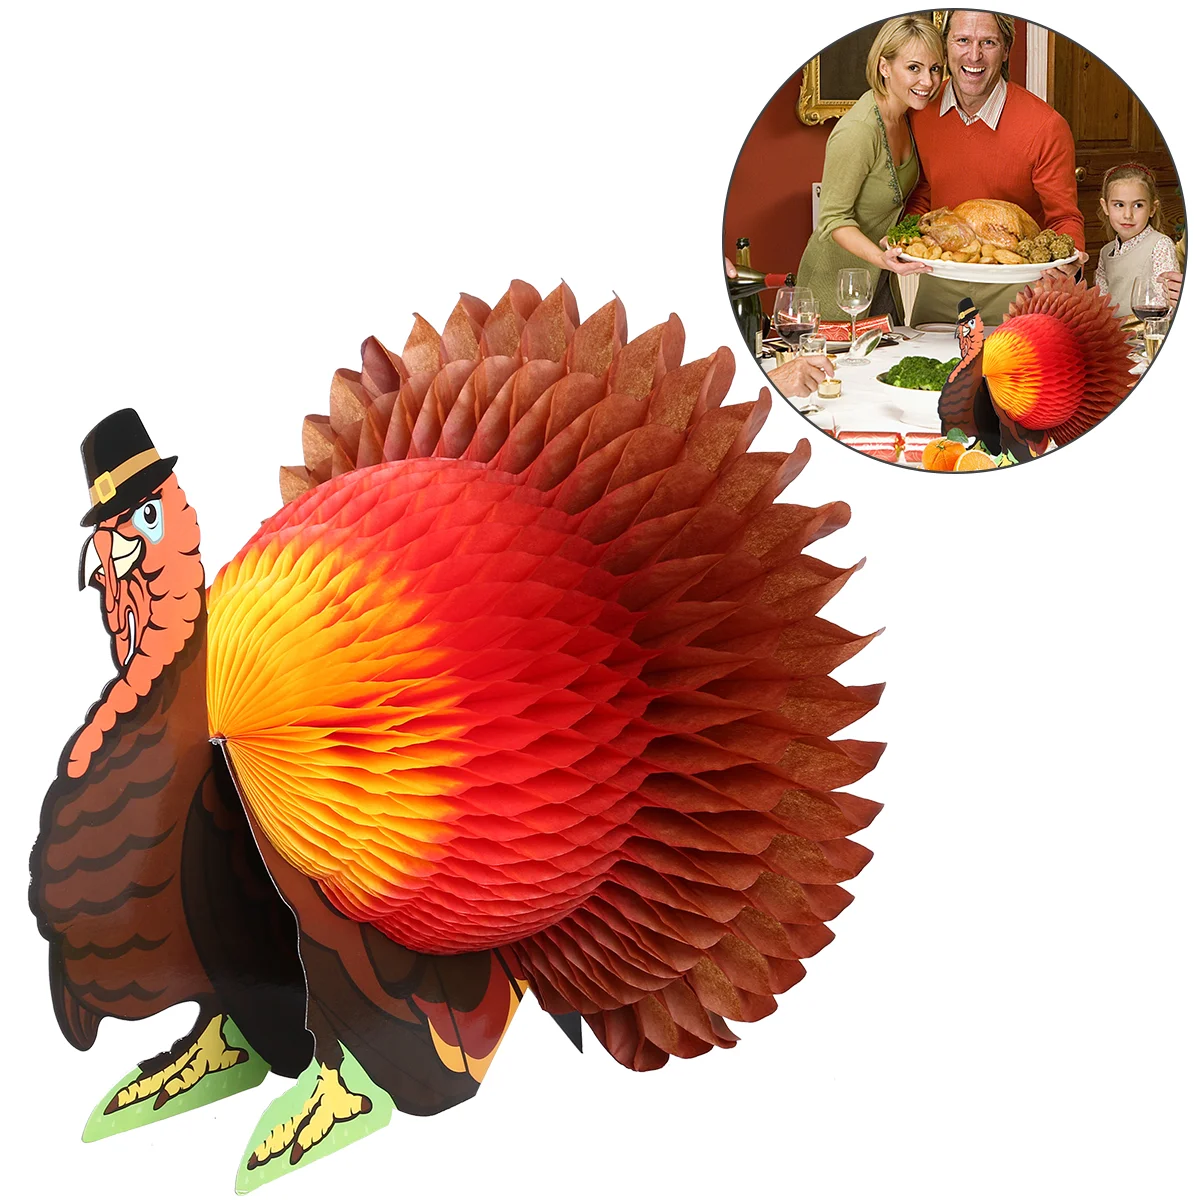 

TINKSKY Tissue Turkey Honeycomb Centerpiece Table Decoration for Thanksgiving Party